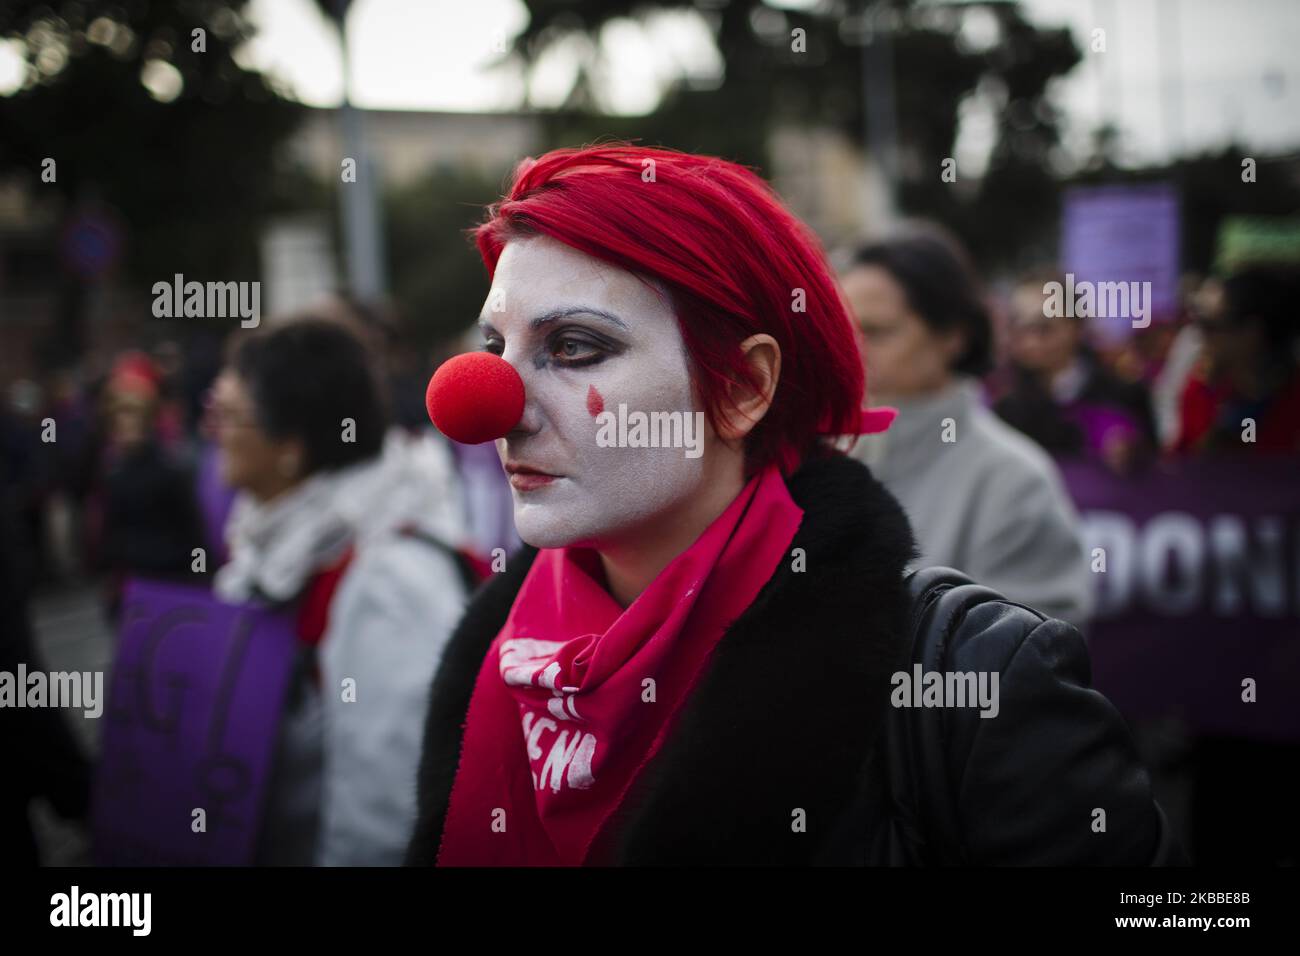 A woman dressed as Daniela 'El Mimo' Carrasco, the Chilean woman found hanged last October 20 on the outskirts of Santiago de Chile, takes part in a national march organised by 'Non Una Di Meno' (Not One Less) movement in Rome, on November 23, 2019. Thousands of people took to the streets to denounce male violence against women, gender discrimination, and harassment in the workplaces. (Photo by Christian Minelli/NurPhoto) Stock Photo